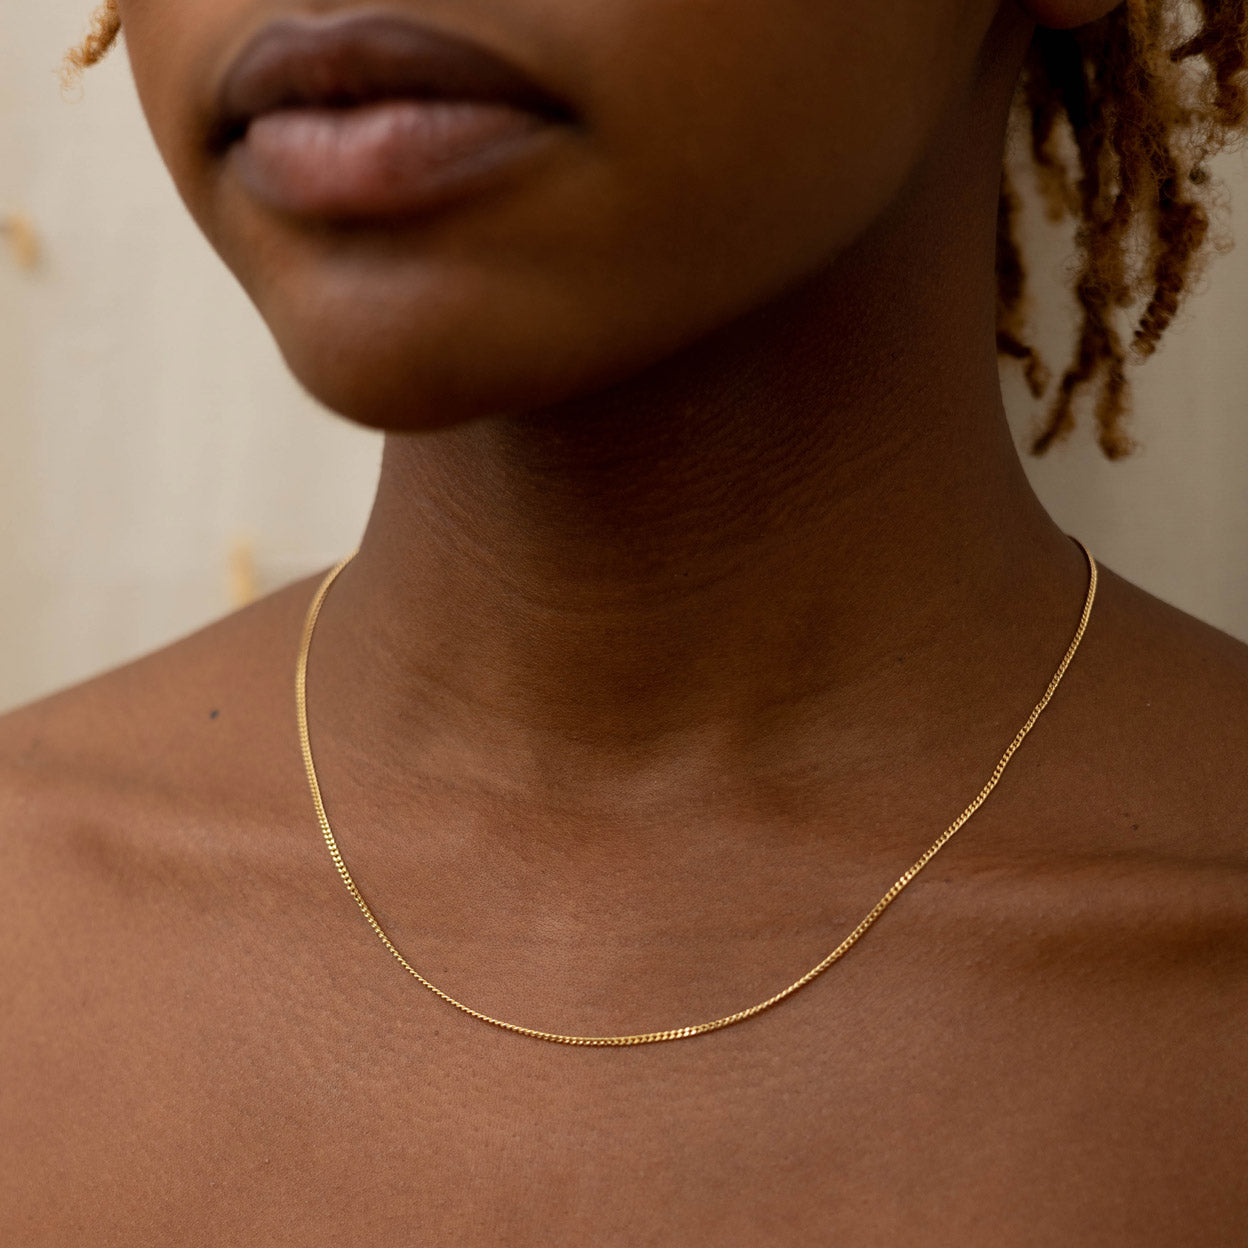 Solid Gold Curb Chain Necklaces - Apparel & Accessories | Jewelry